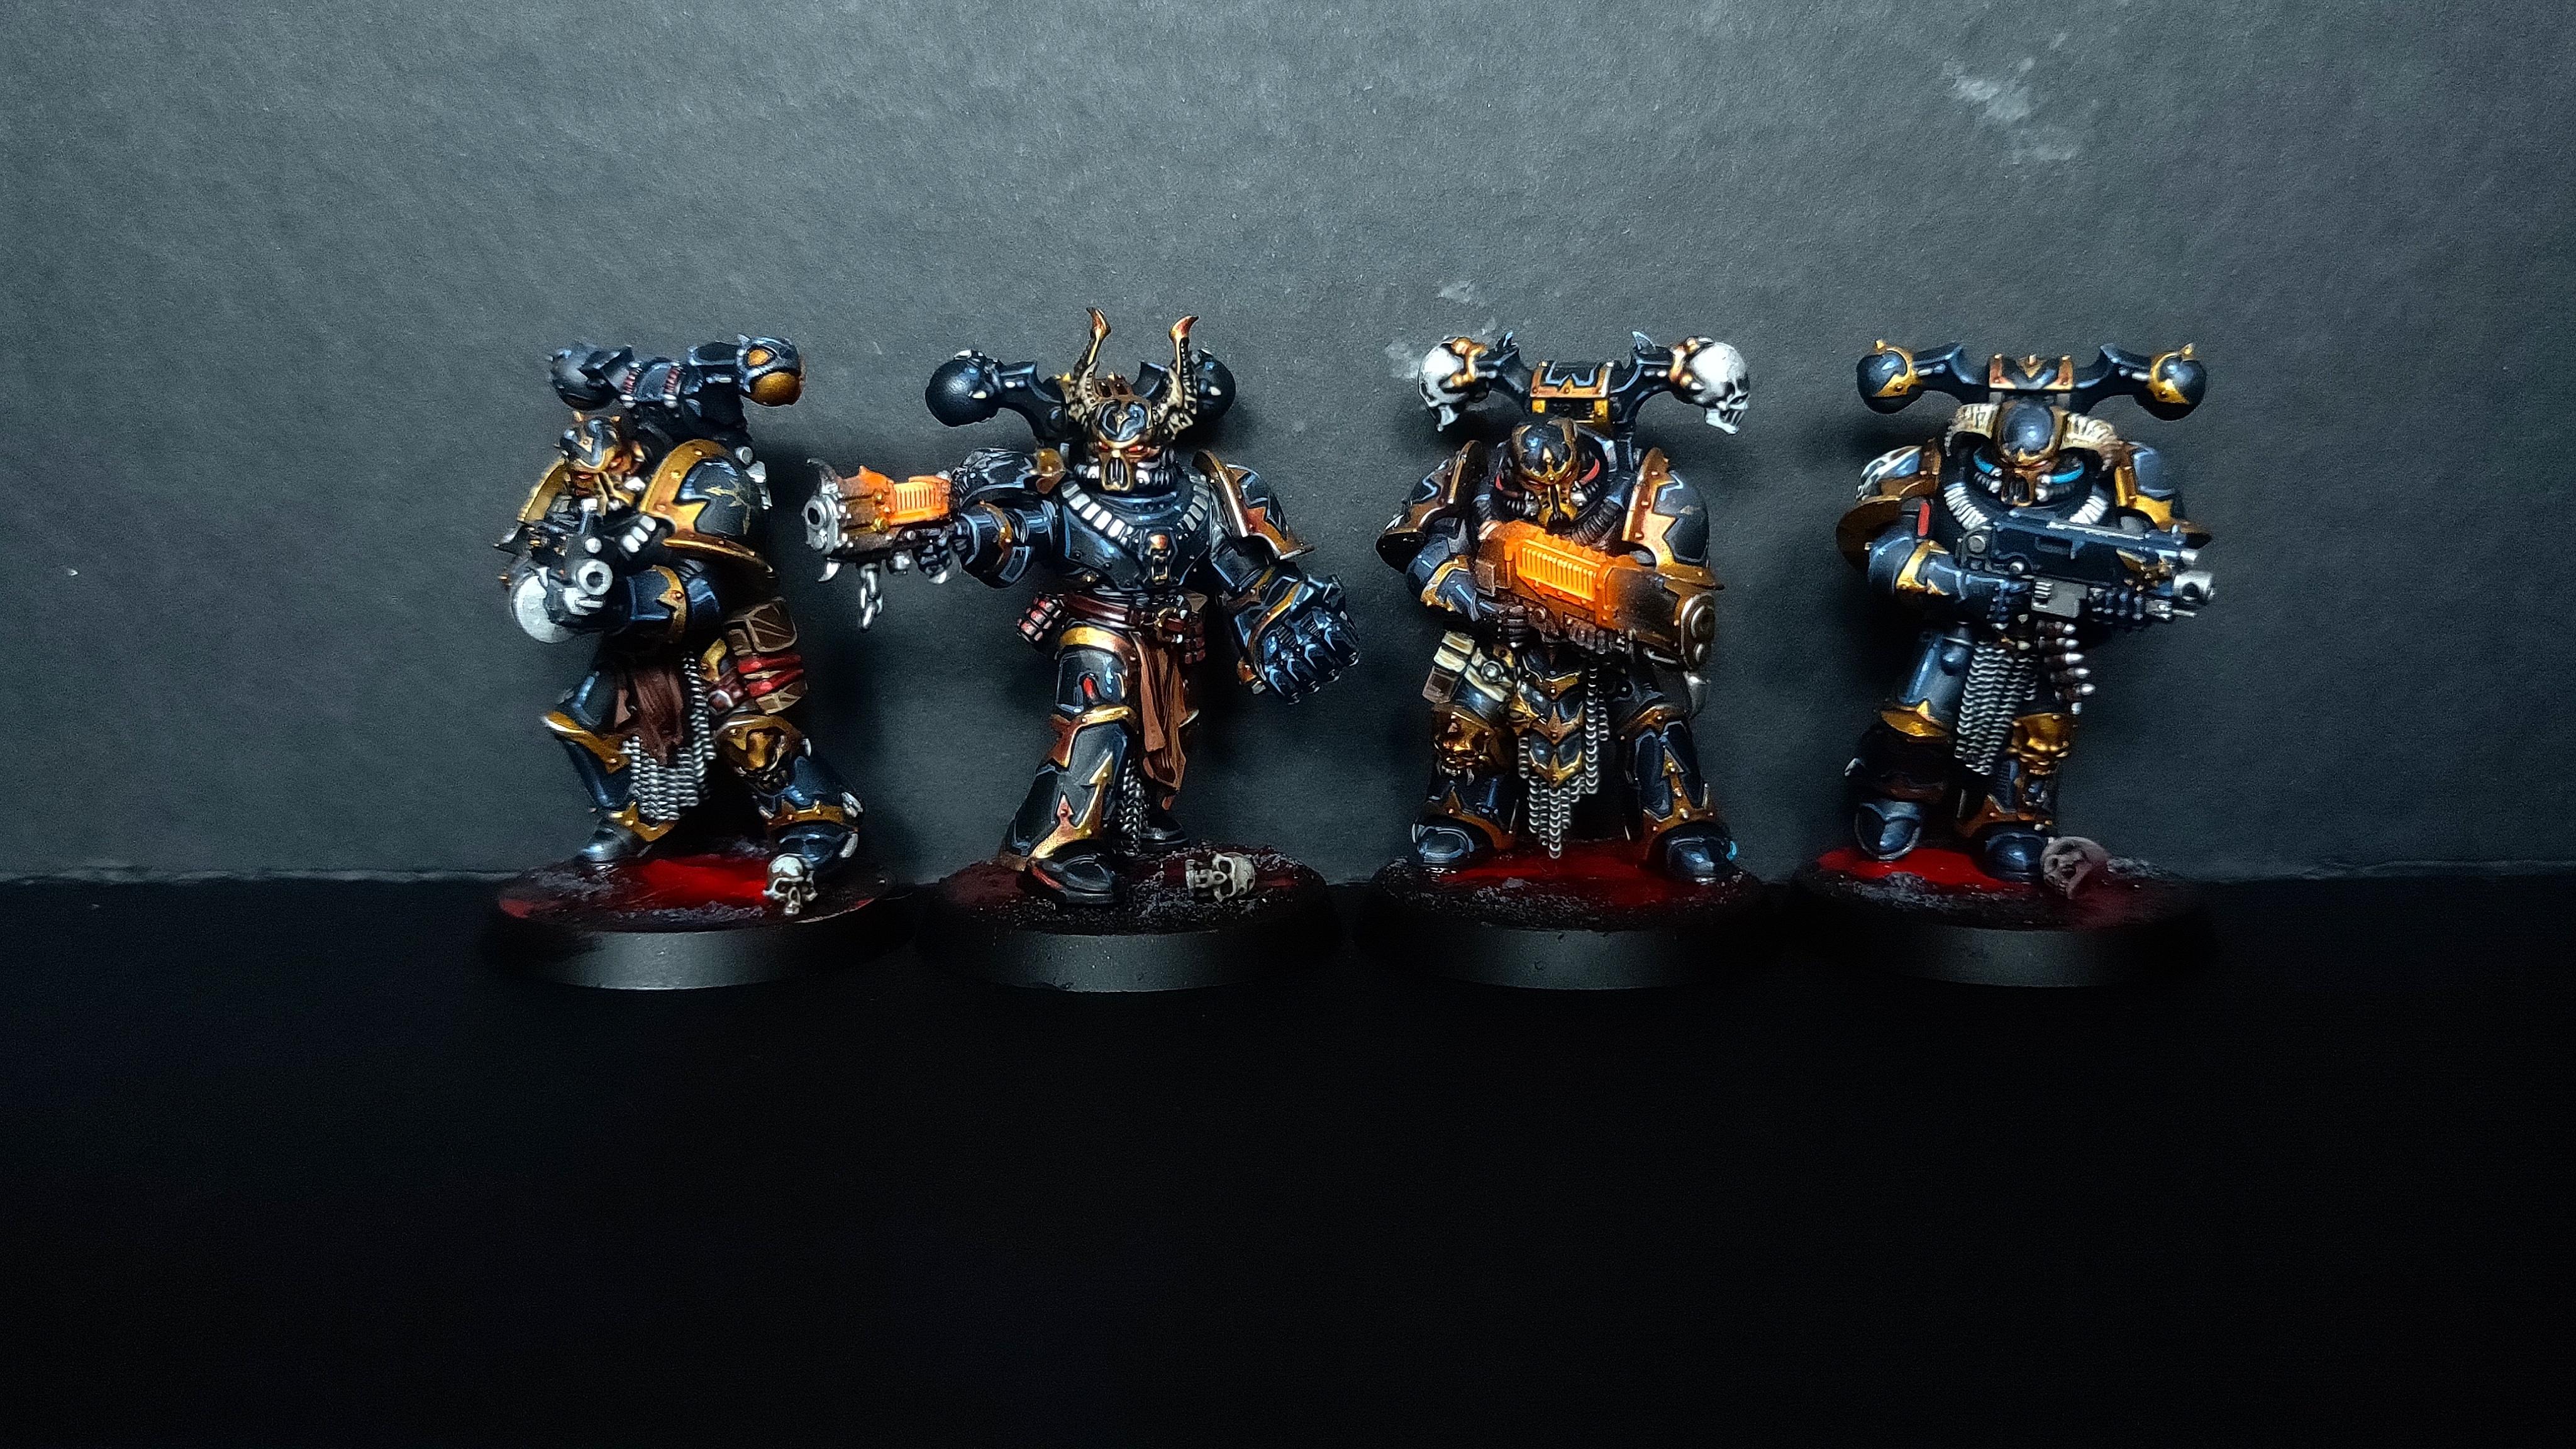 Black Legion, Chaos, Chaos Knight, Chaos Space Marines, Chaos Undivided, Heretic Astartes, Sin Eaters, Warhammer 40,000